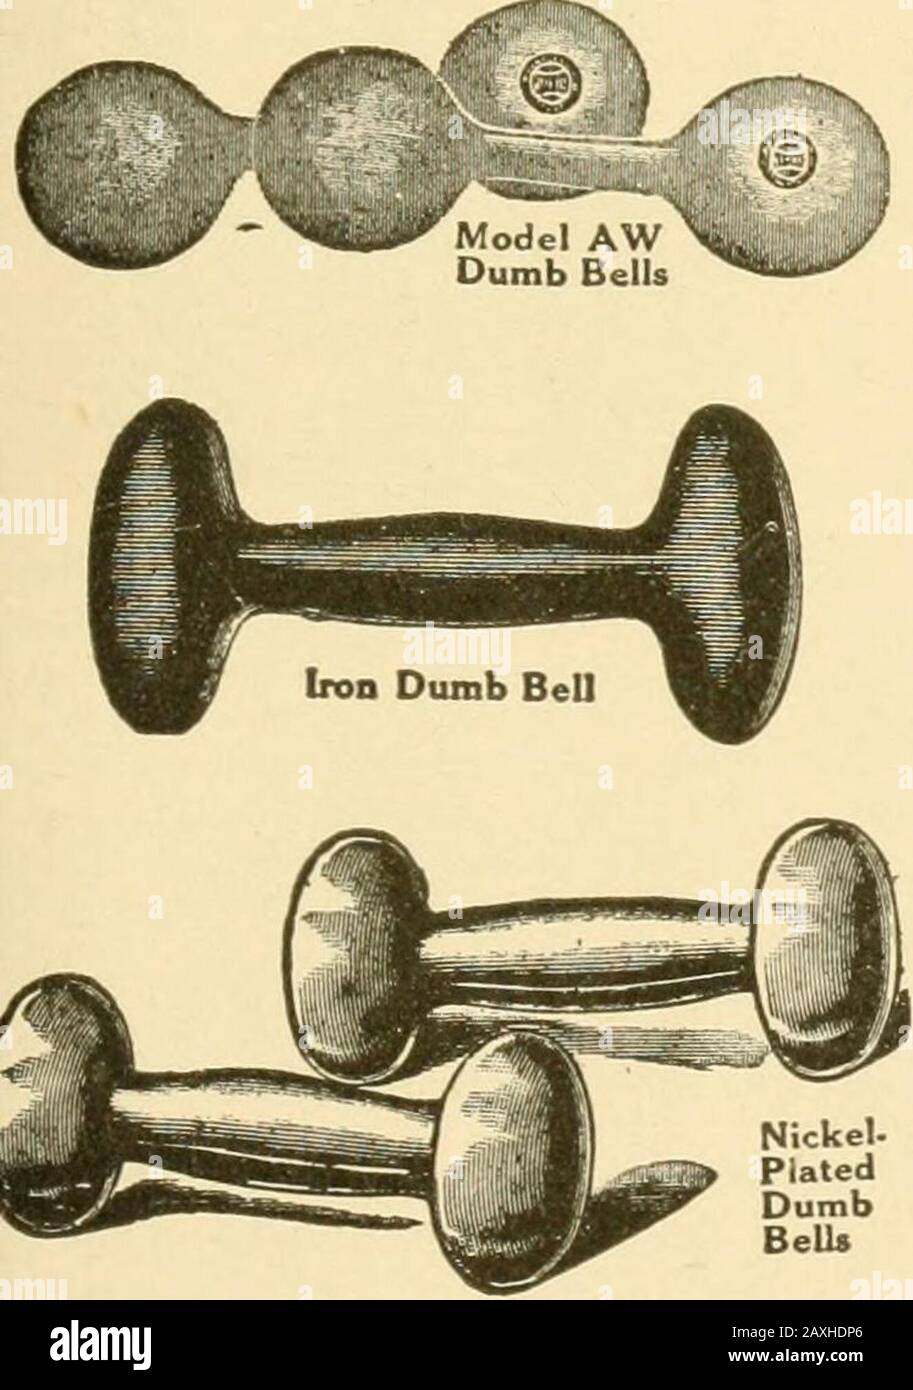 Graded calisthenic and dumb bell drills . t 25 lbs. or more for complete Bar Bell, sup-plied regularly with steel handles, length 3 feet between bells 12c.lb.*i0^c. Z6. Bar Bells, v^reight 25 lbs. or more for complete Bar Bell, w^ithsteel handles, either shorter or longer than regular length, as noted above 15c. lb, * J^Kc. i6. Prices for Bar Bells, weighing other than above, quoted on application. Quantity prices in italics will he allowed on 25 lbs. or more of iron dumb hells or 100 lbs. or more of bar hells. Spalding Nickel-Plated Dumb Bells Nickel-Plated and Polished Pair, 40c. ir $i.32 Do Stock Photo